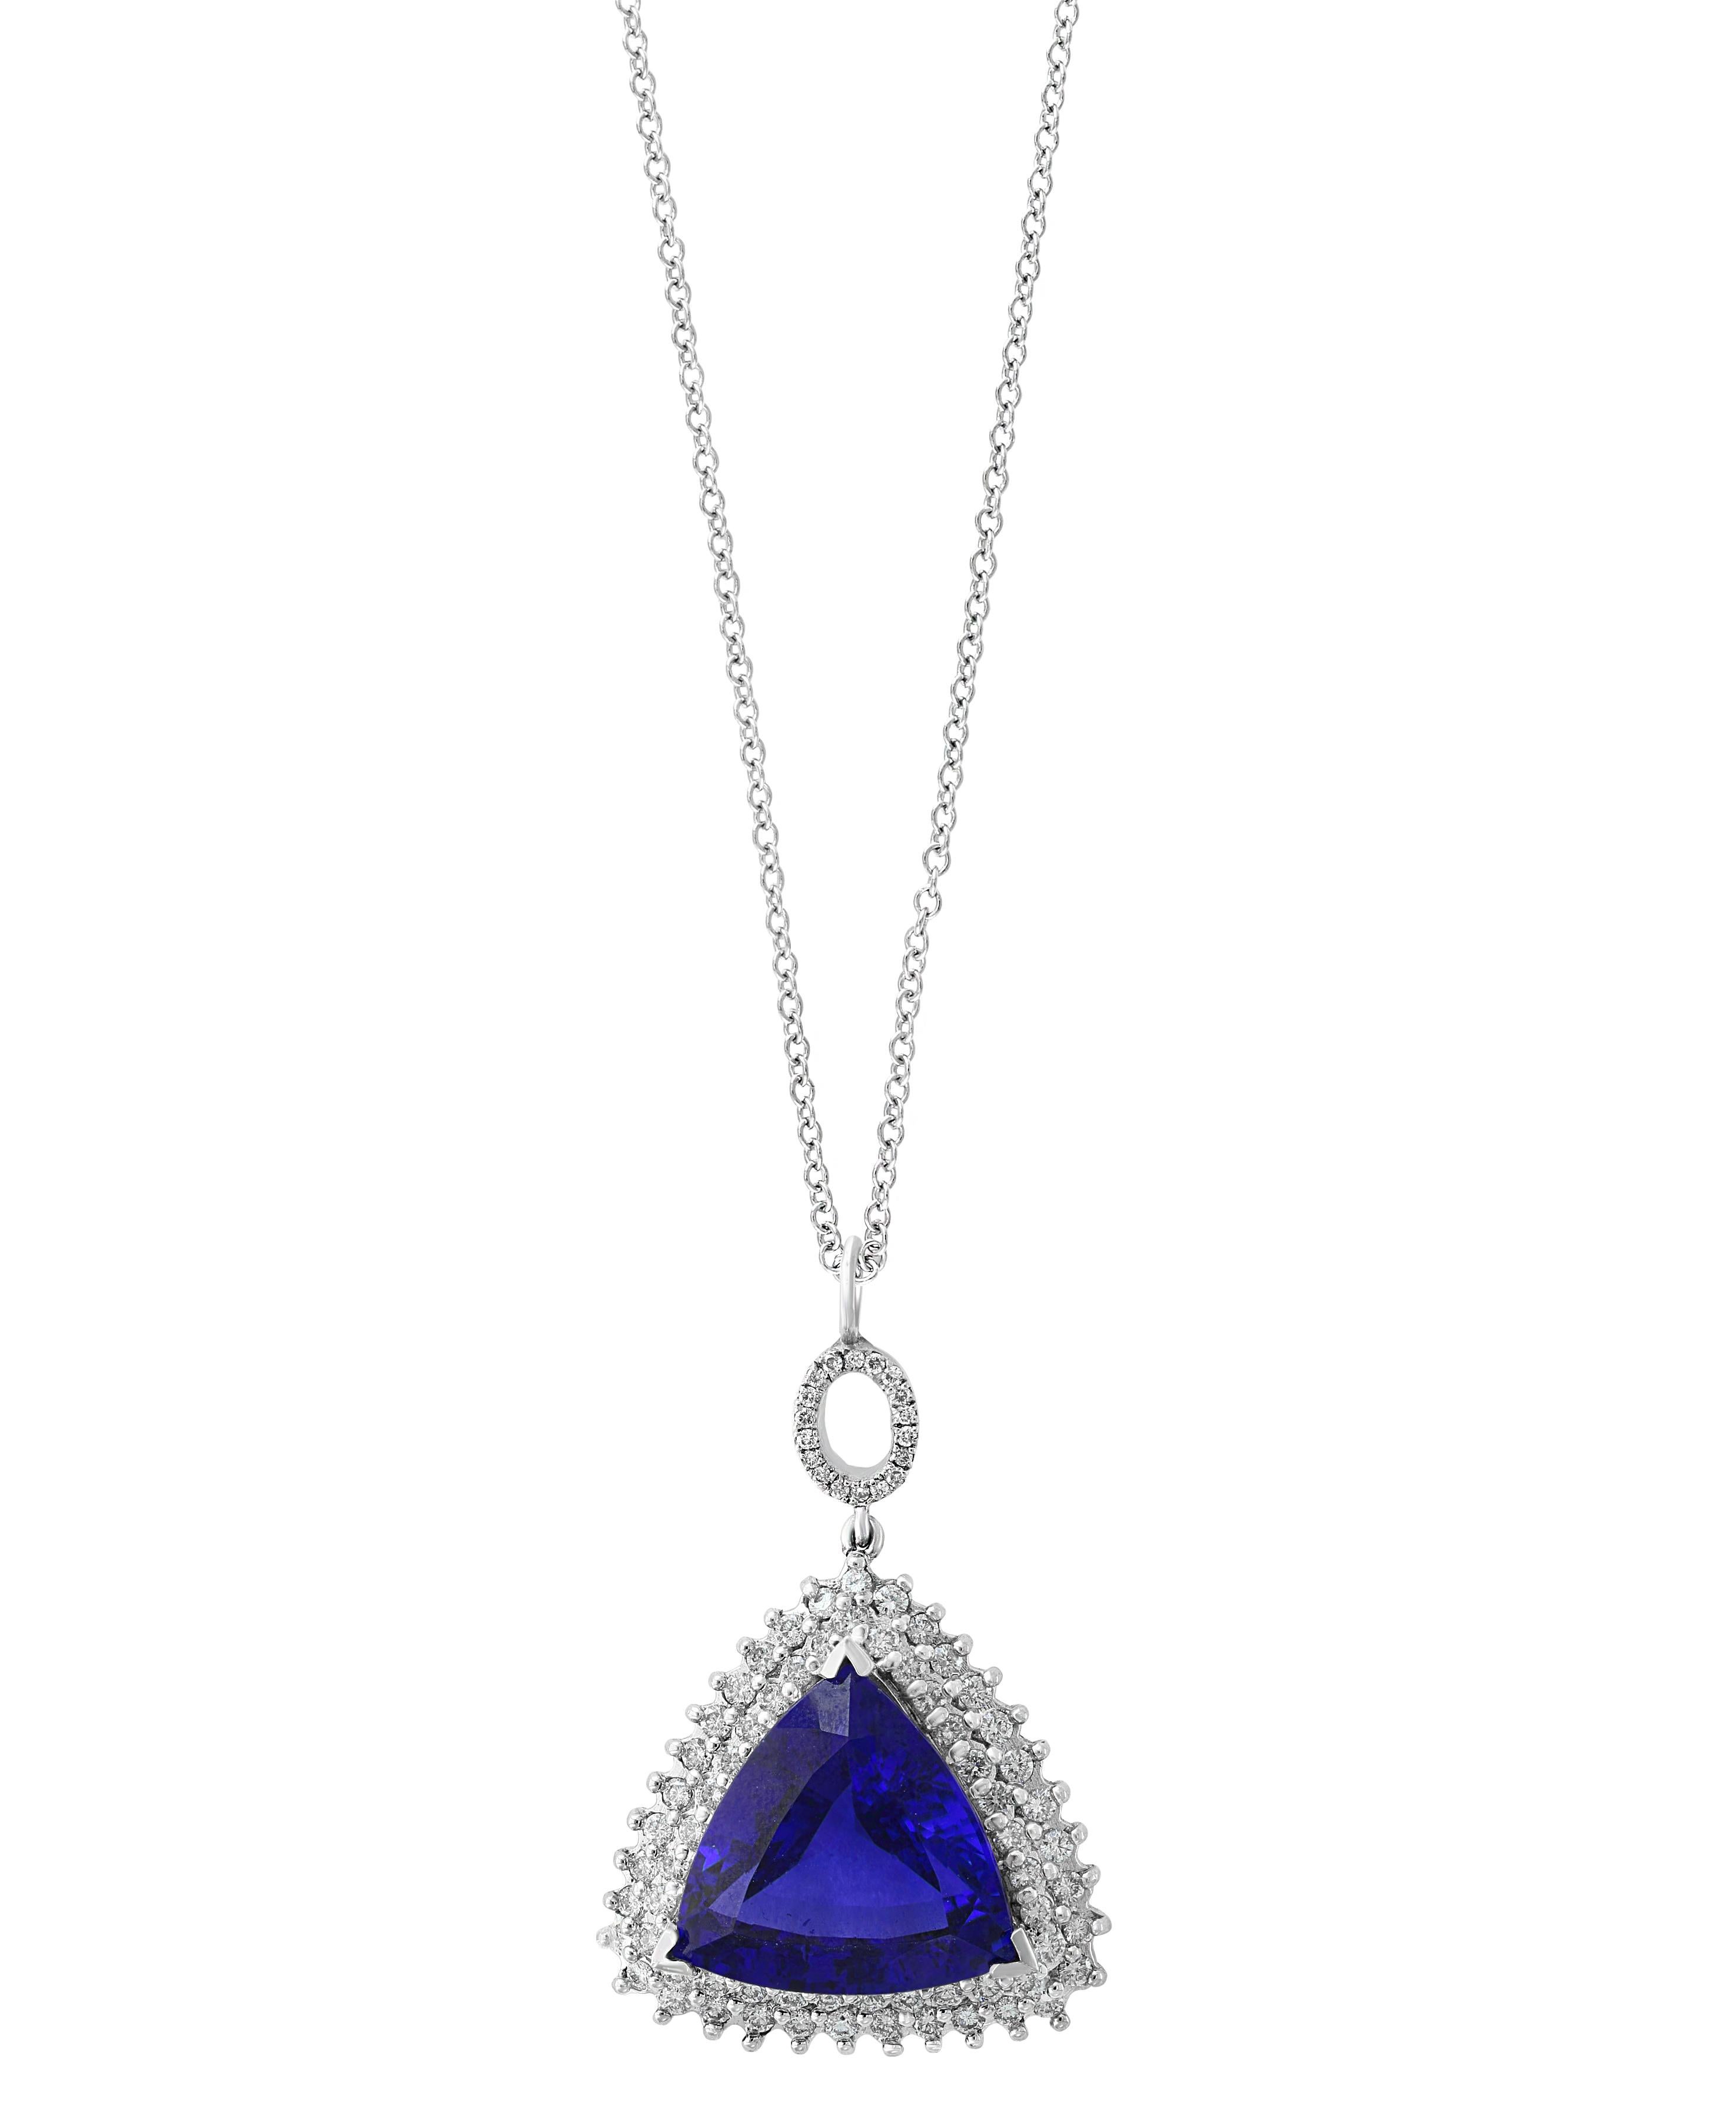 
17 carats of fine  quality of  Tanzanite pendant surrounded by brilliant round  cut Diamonds all mounted in 18 karat White  gold. Weight of the necklace is 13 Grams . 
Tanzanite Weight  17 Carats
Diamond Weight 3.6 Carats
18 K gold Weight  13